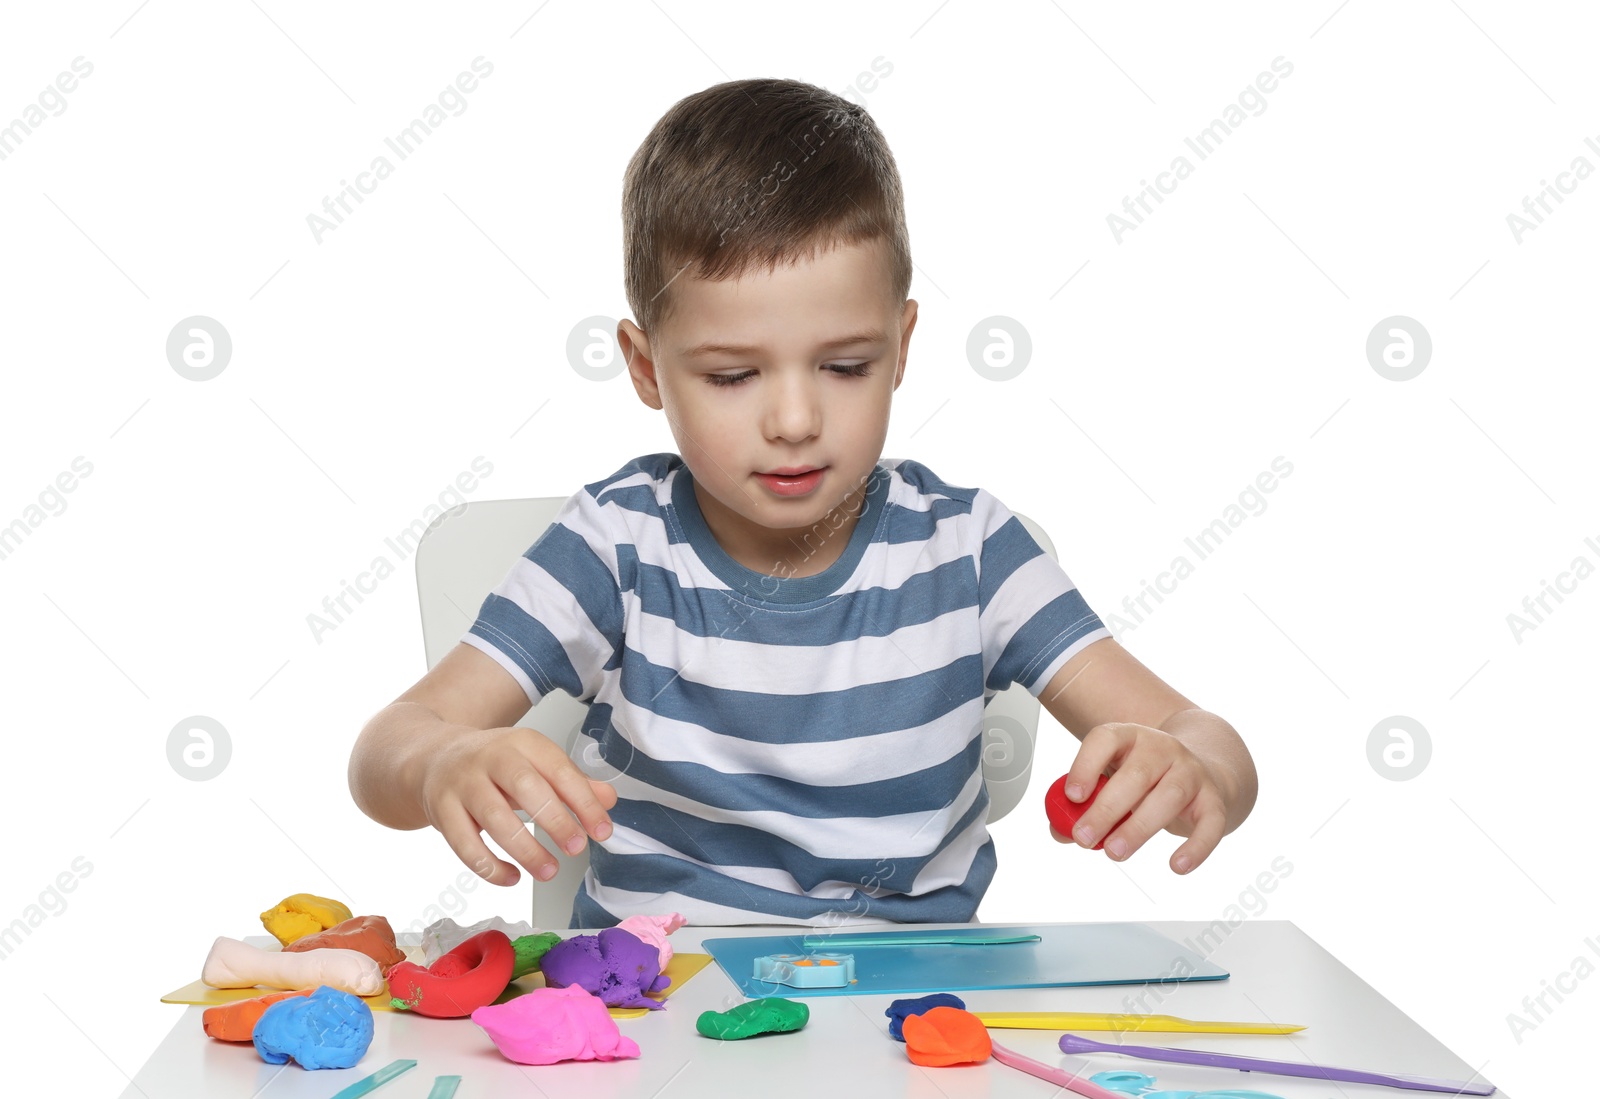 Photo of Little boy sculpting with play dough at table on white background